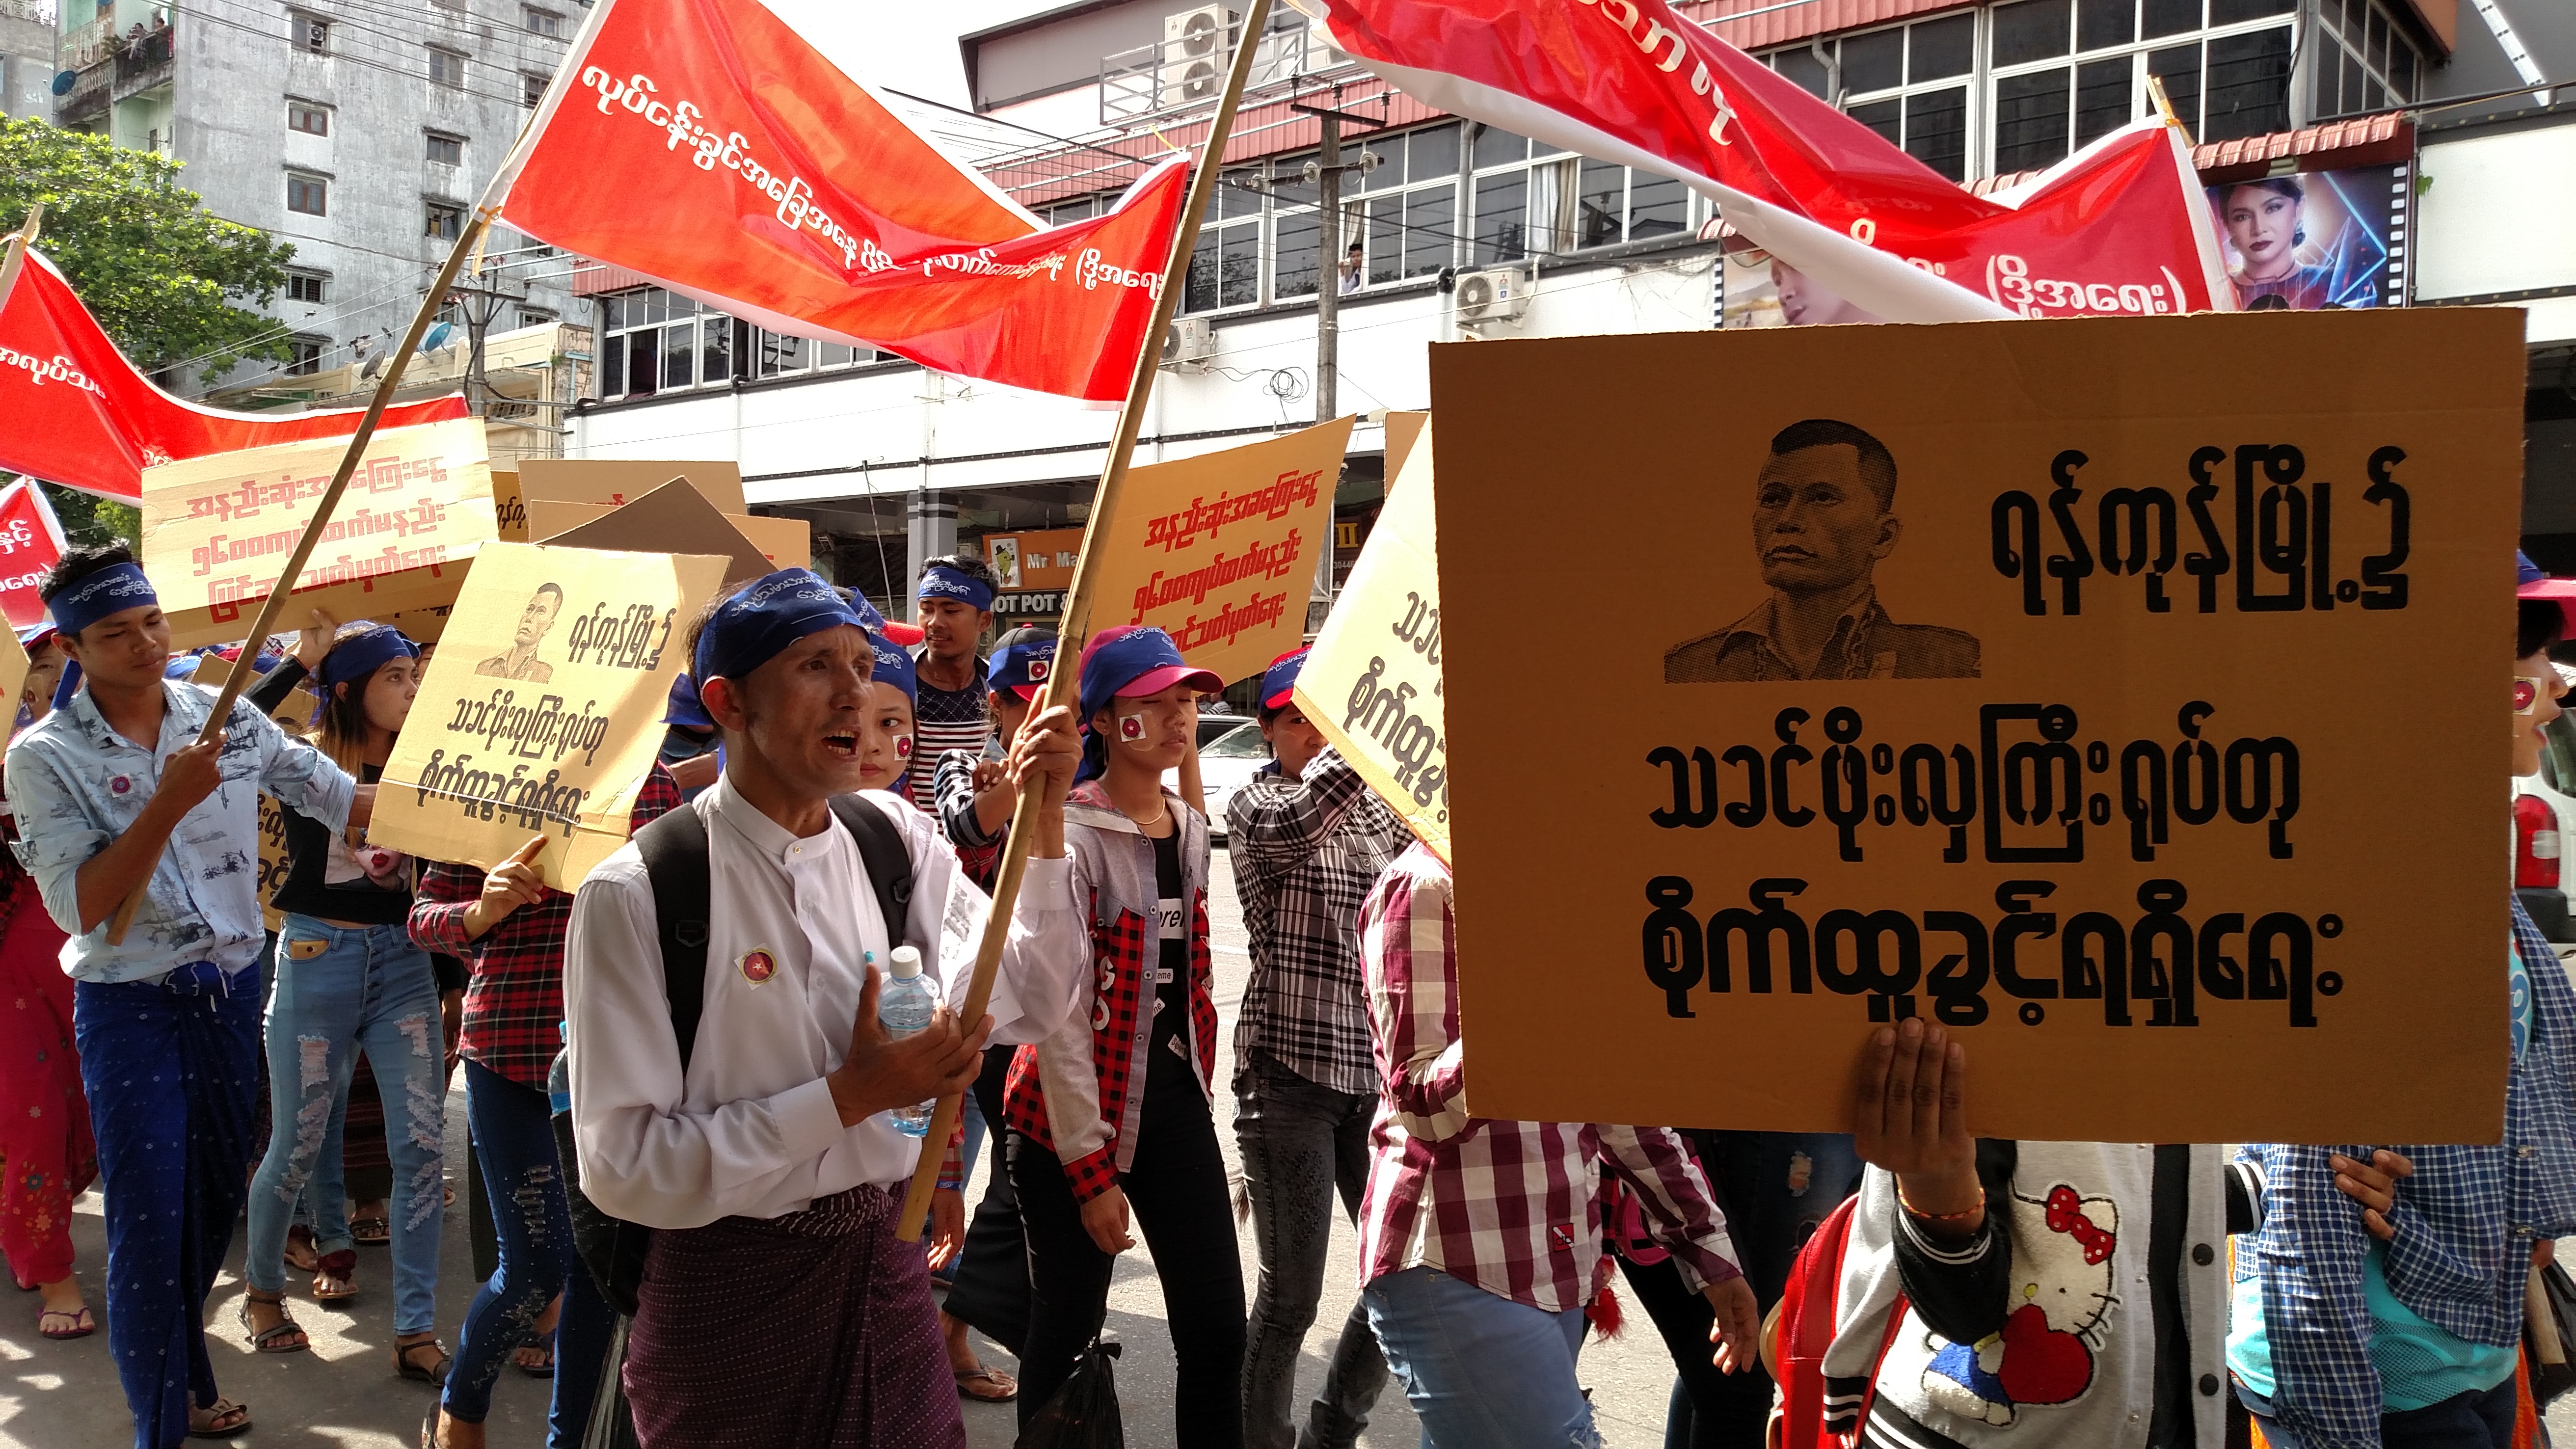 Labor activists demonstrate in downtown Yangon on May 1, 2018.